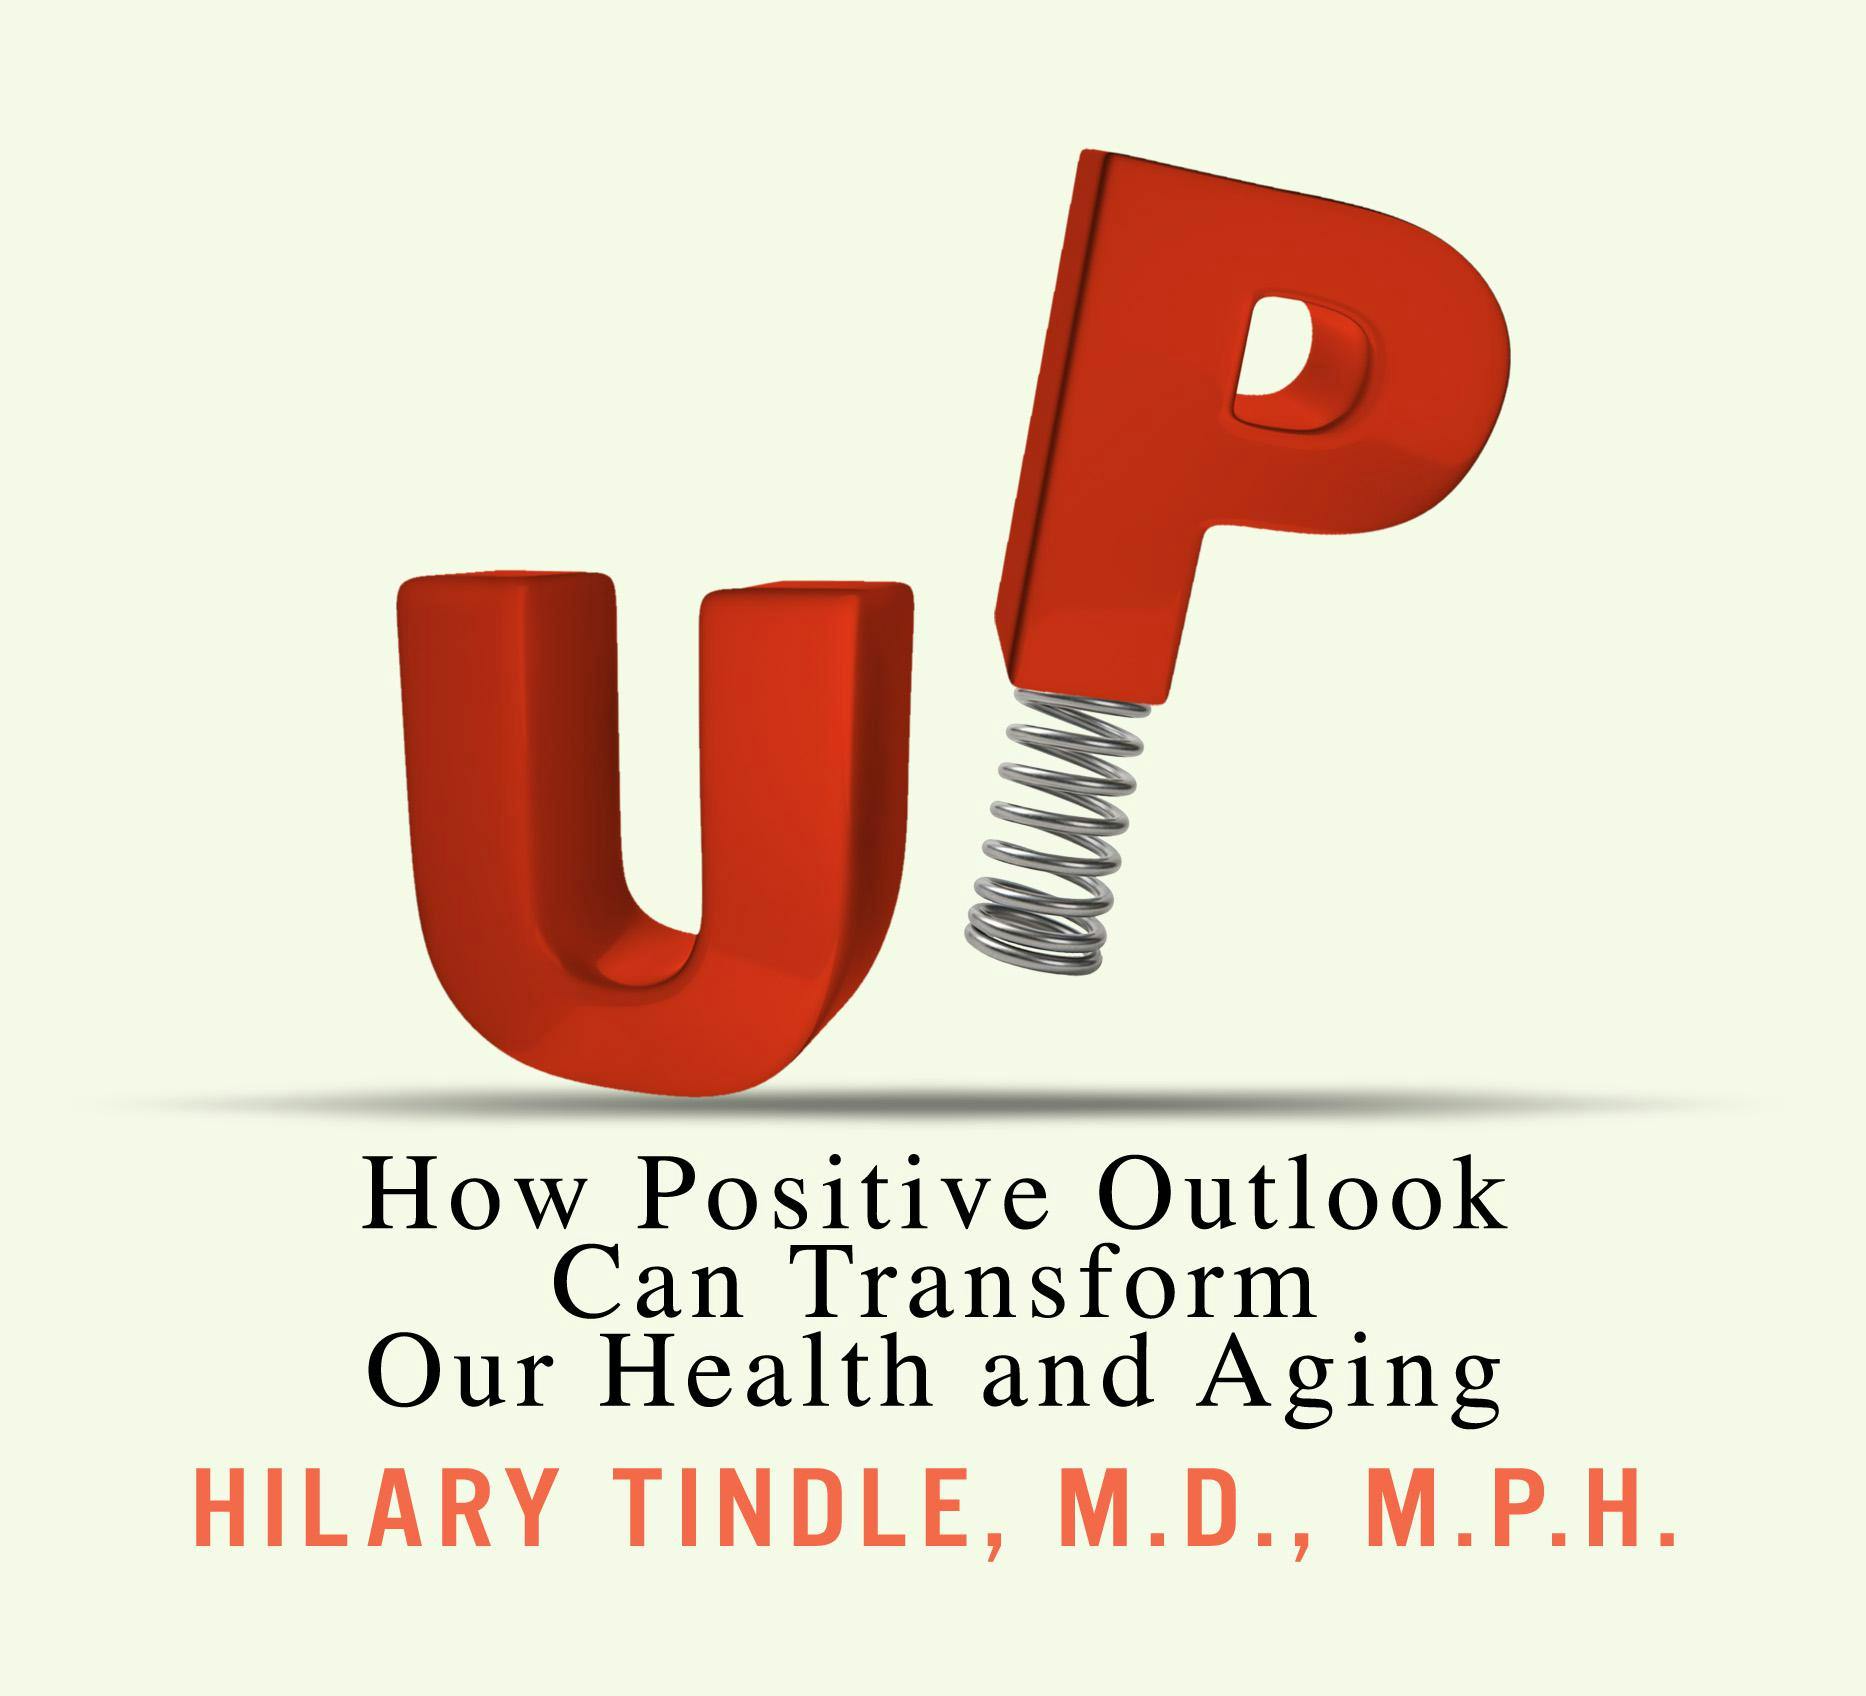 Up: How Positive Outlook Can Transform Our Health and Aging - Hilary Tindle